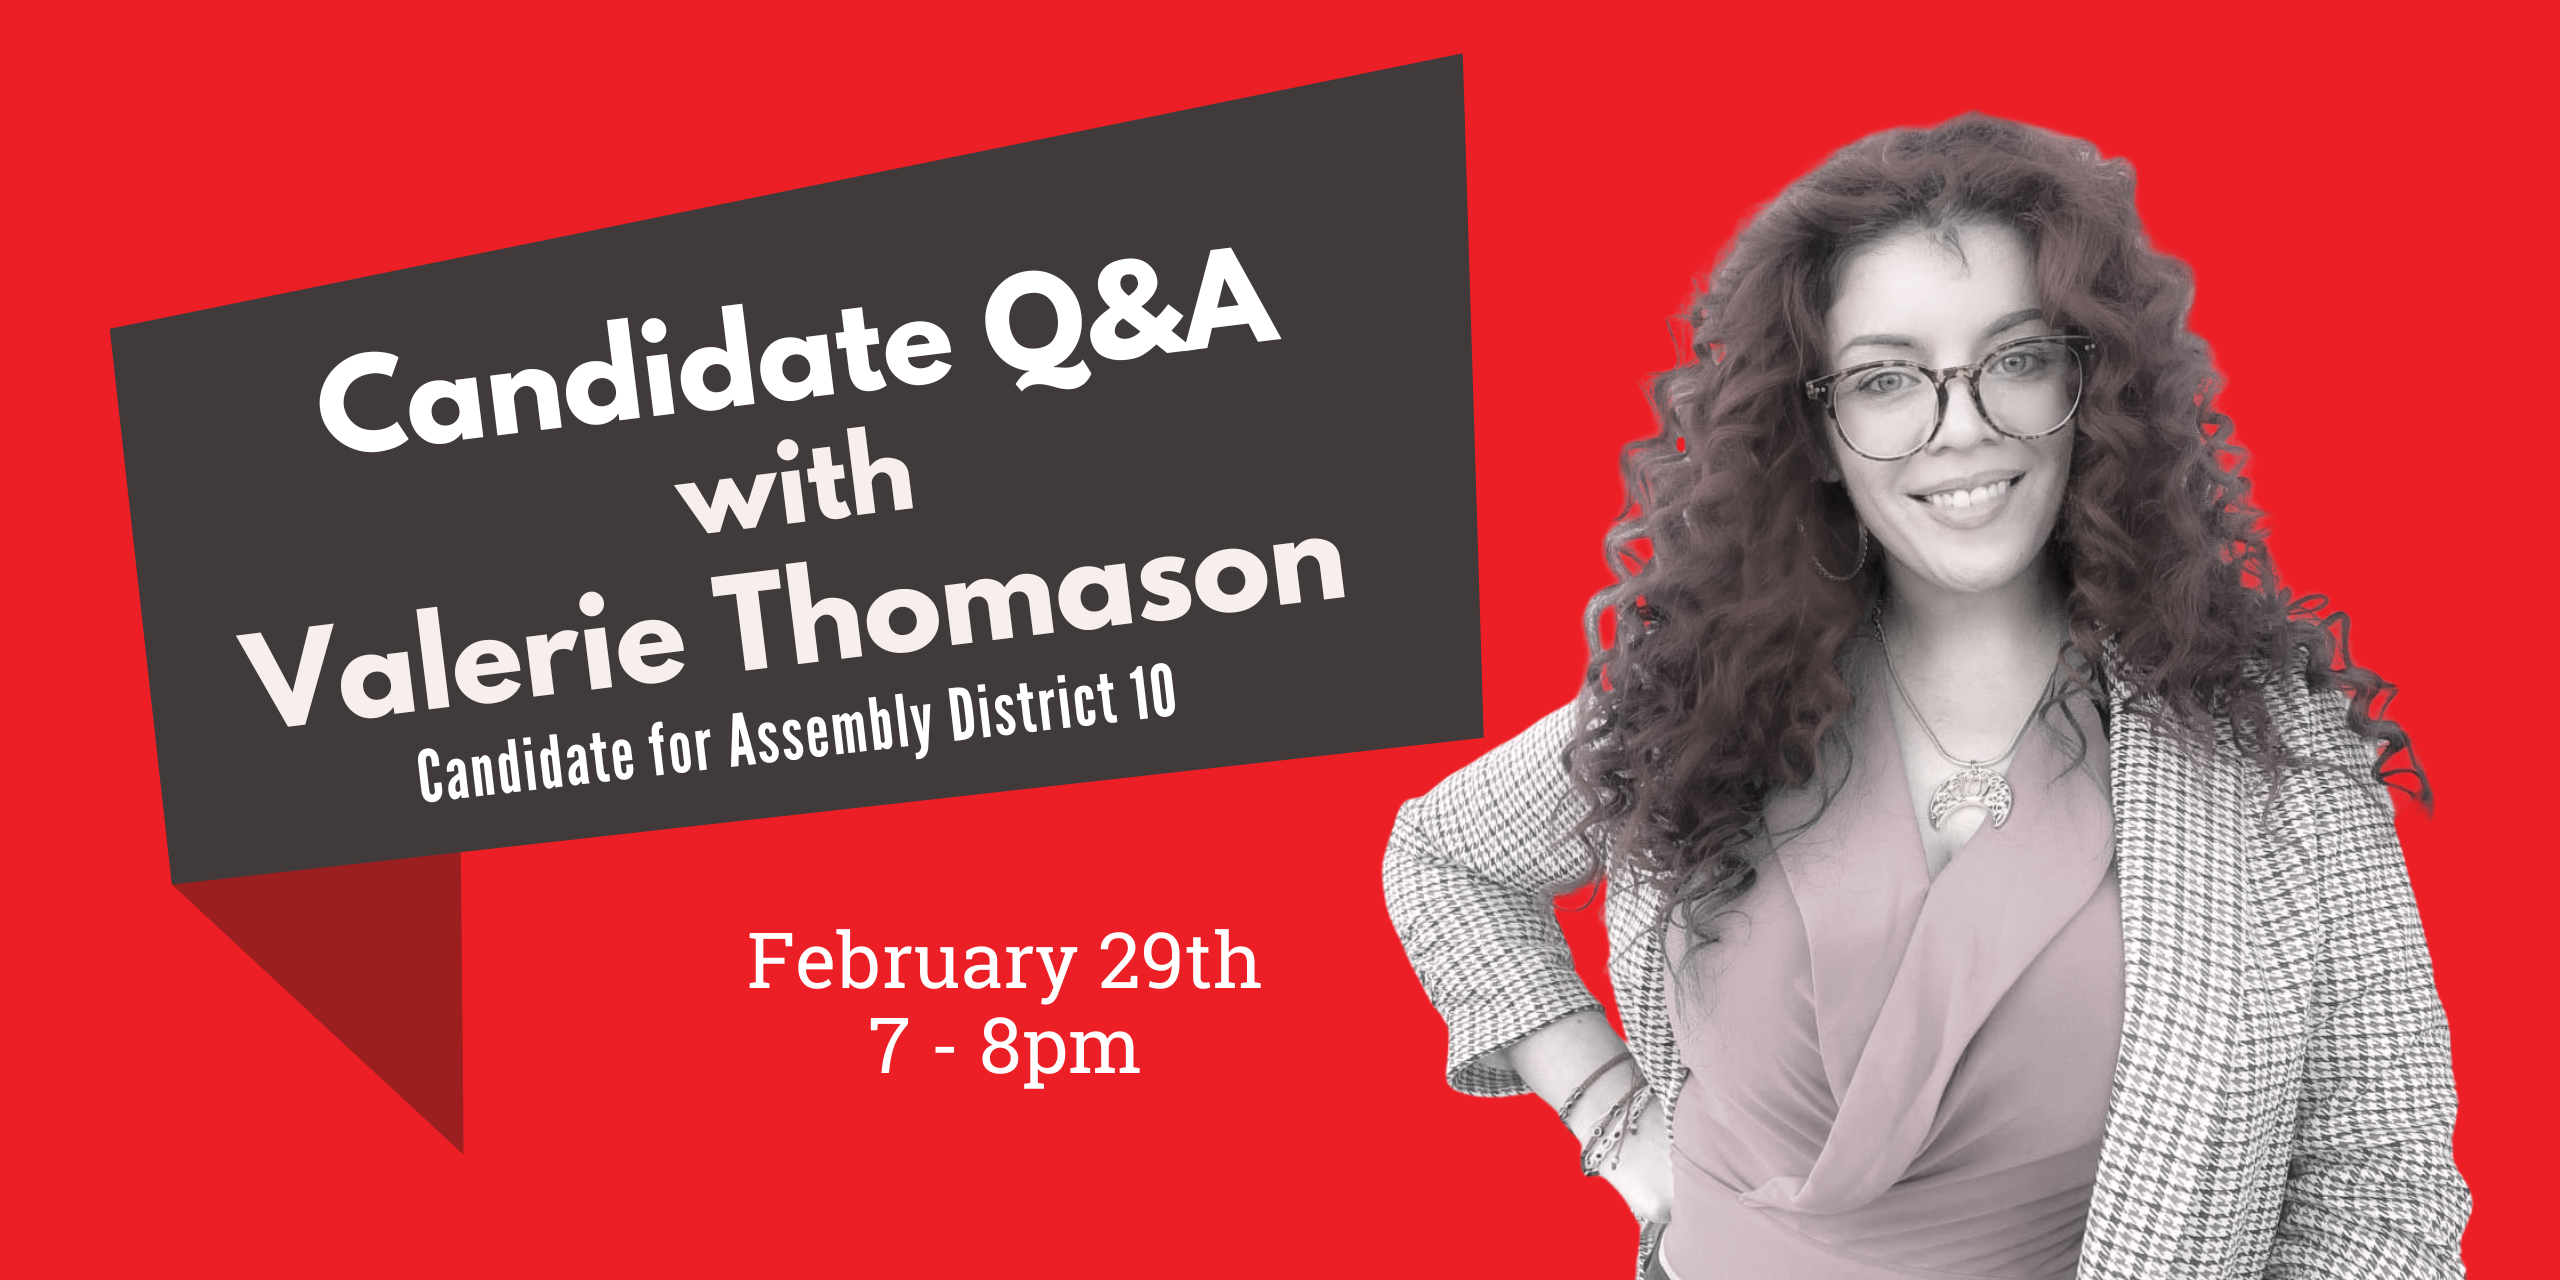 Candidate Q&A with Valerie Thomason, Candidate for Assembly District 10. February 29th, 7 to 8 pm.